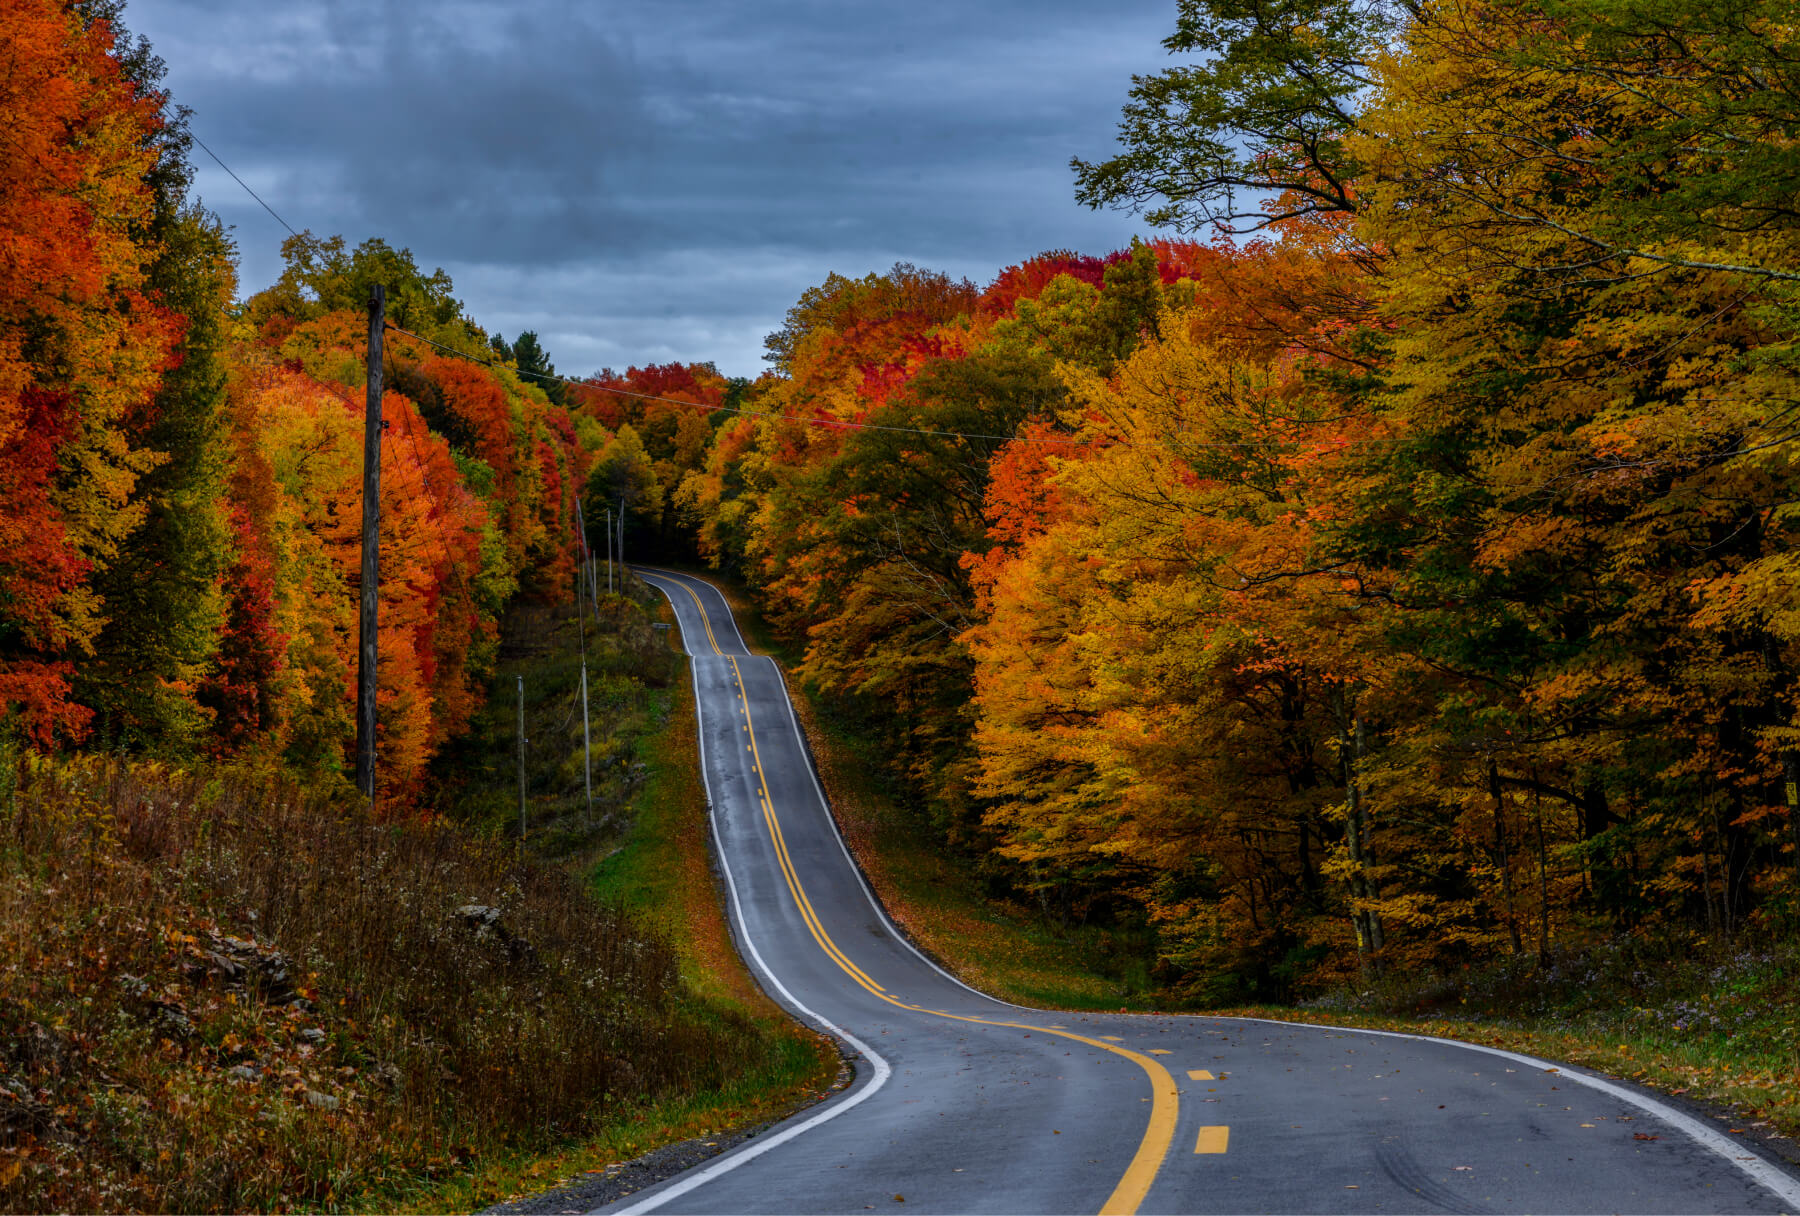 Beautiful two-lane road adorned with fall foliage and trees